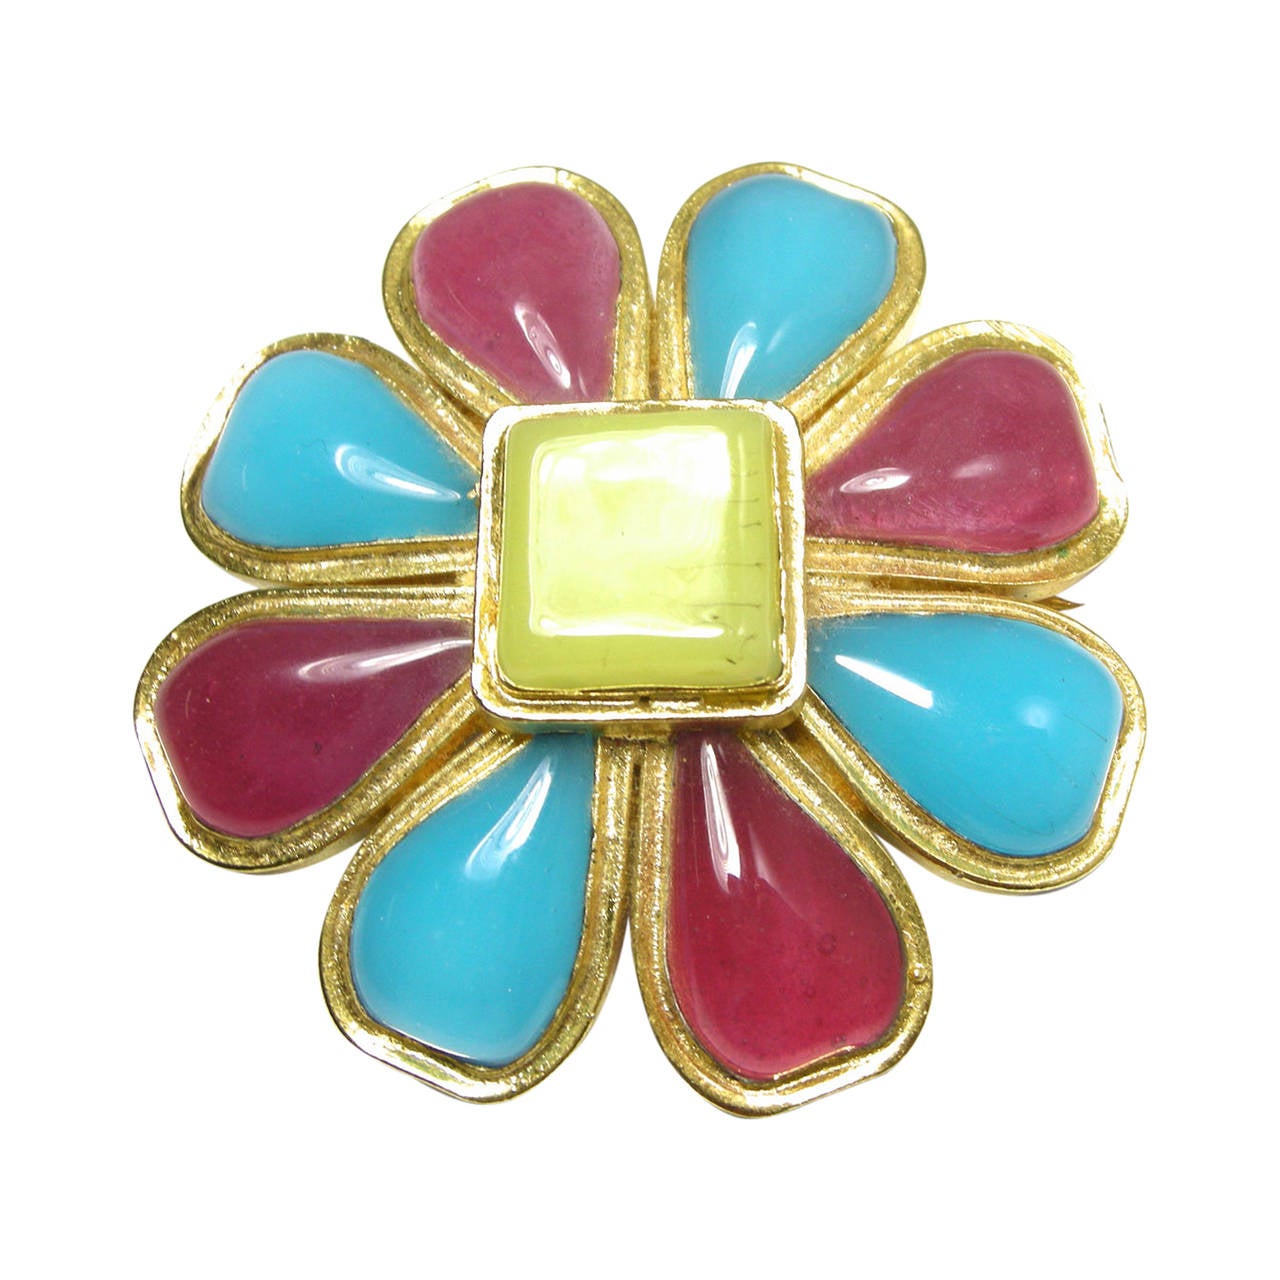 Vintage Authentic Chanel Gripoix Brooch/Pin